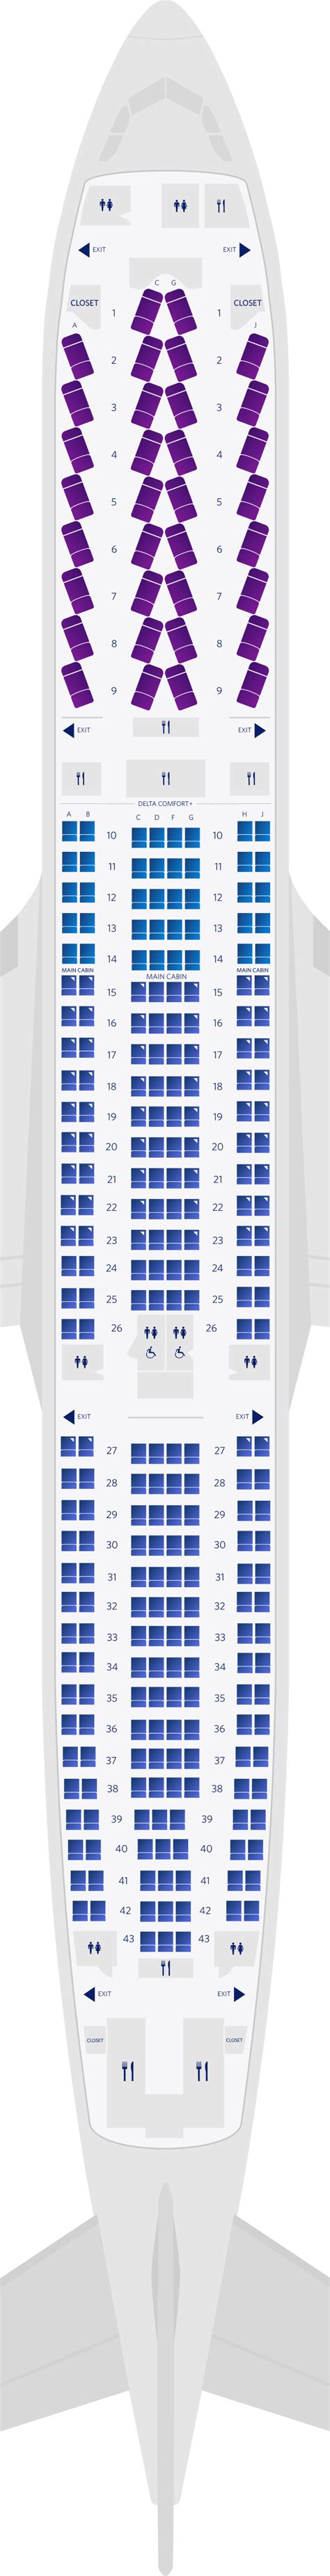 Airbus A330 Seat Map Two Birds Home